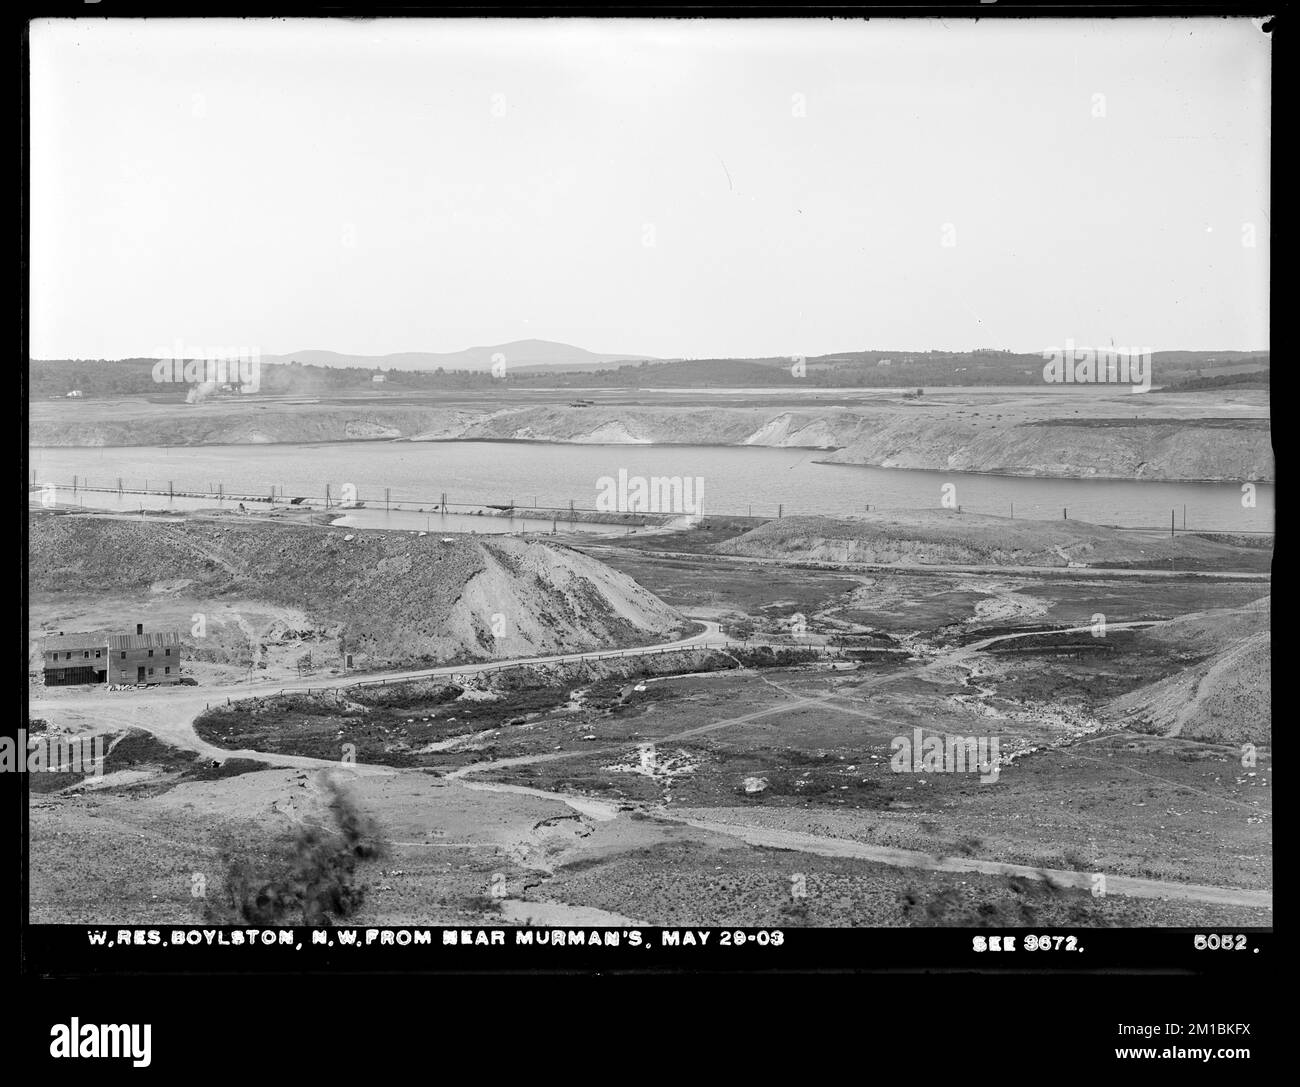 Wachusett Reservoir, northwest from near Murman's, (compare with No. 3672), Boylston, Mass., May 29, 1903 , waterworks, reservoirs water distribution structures, construction sites Stock Photo